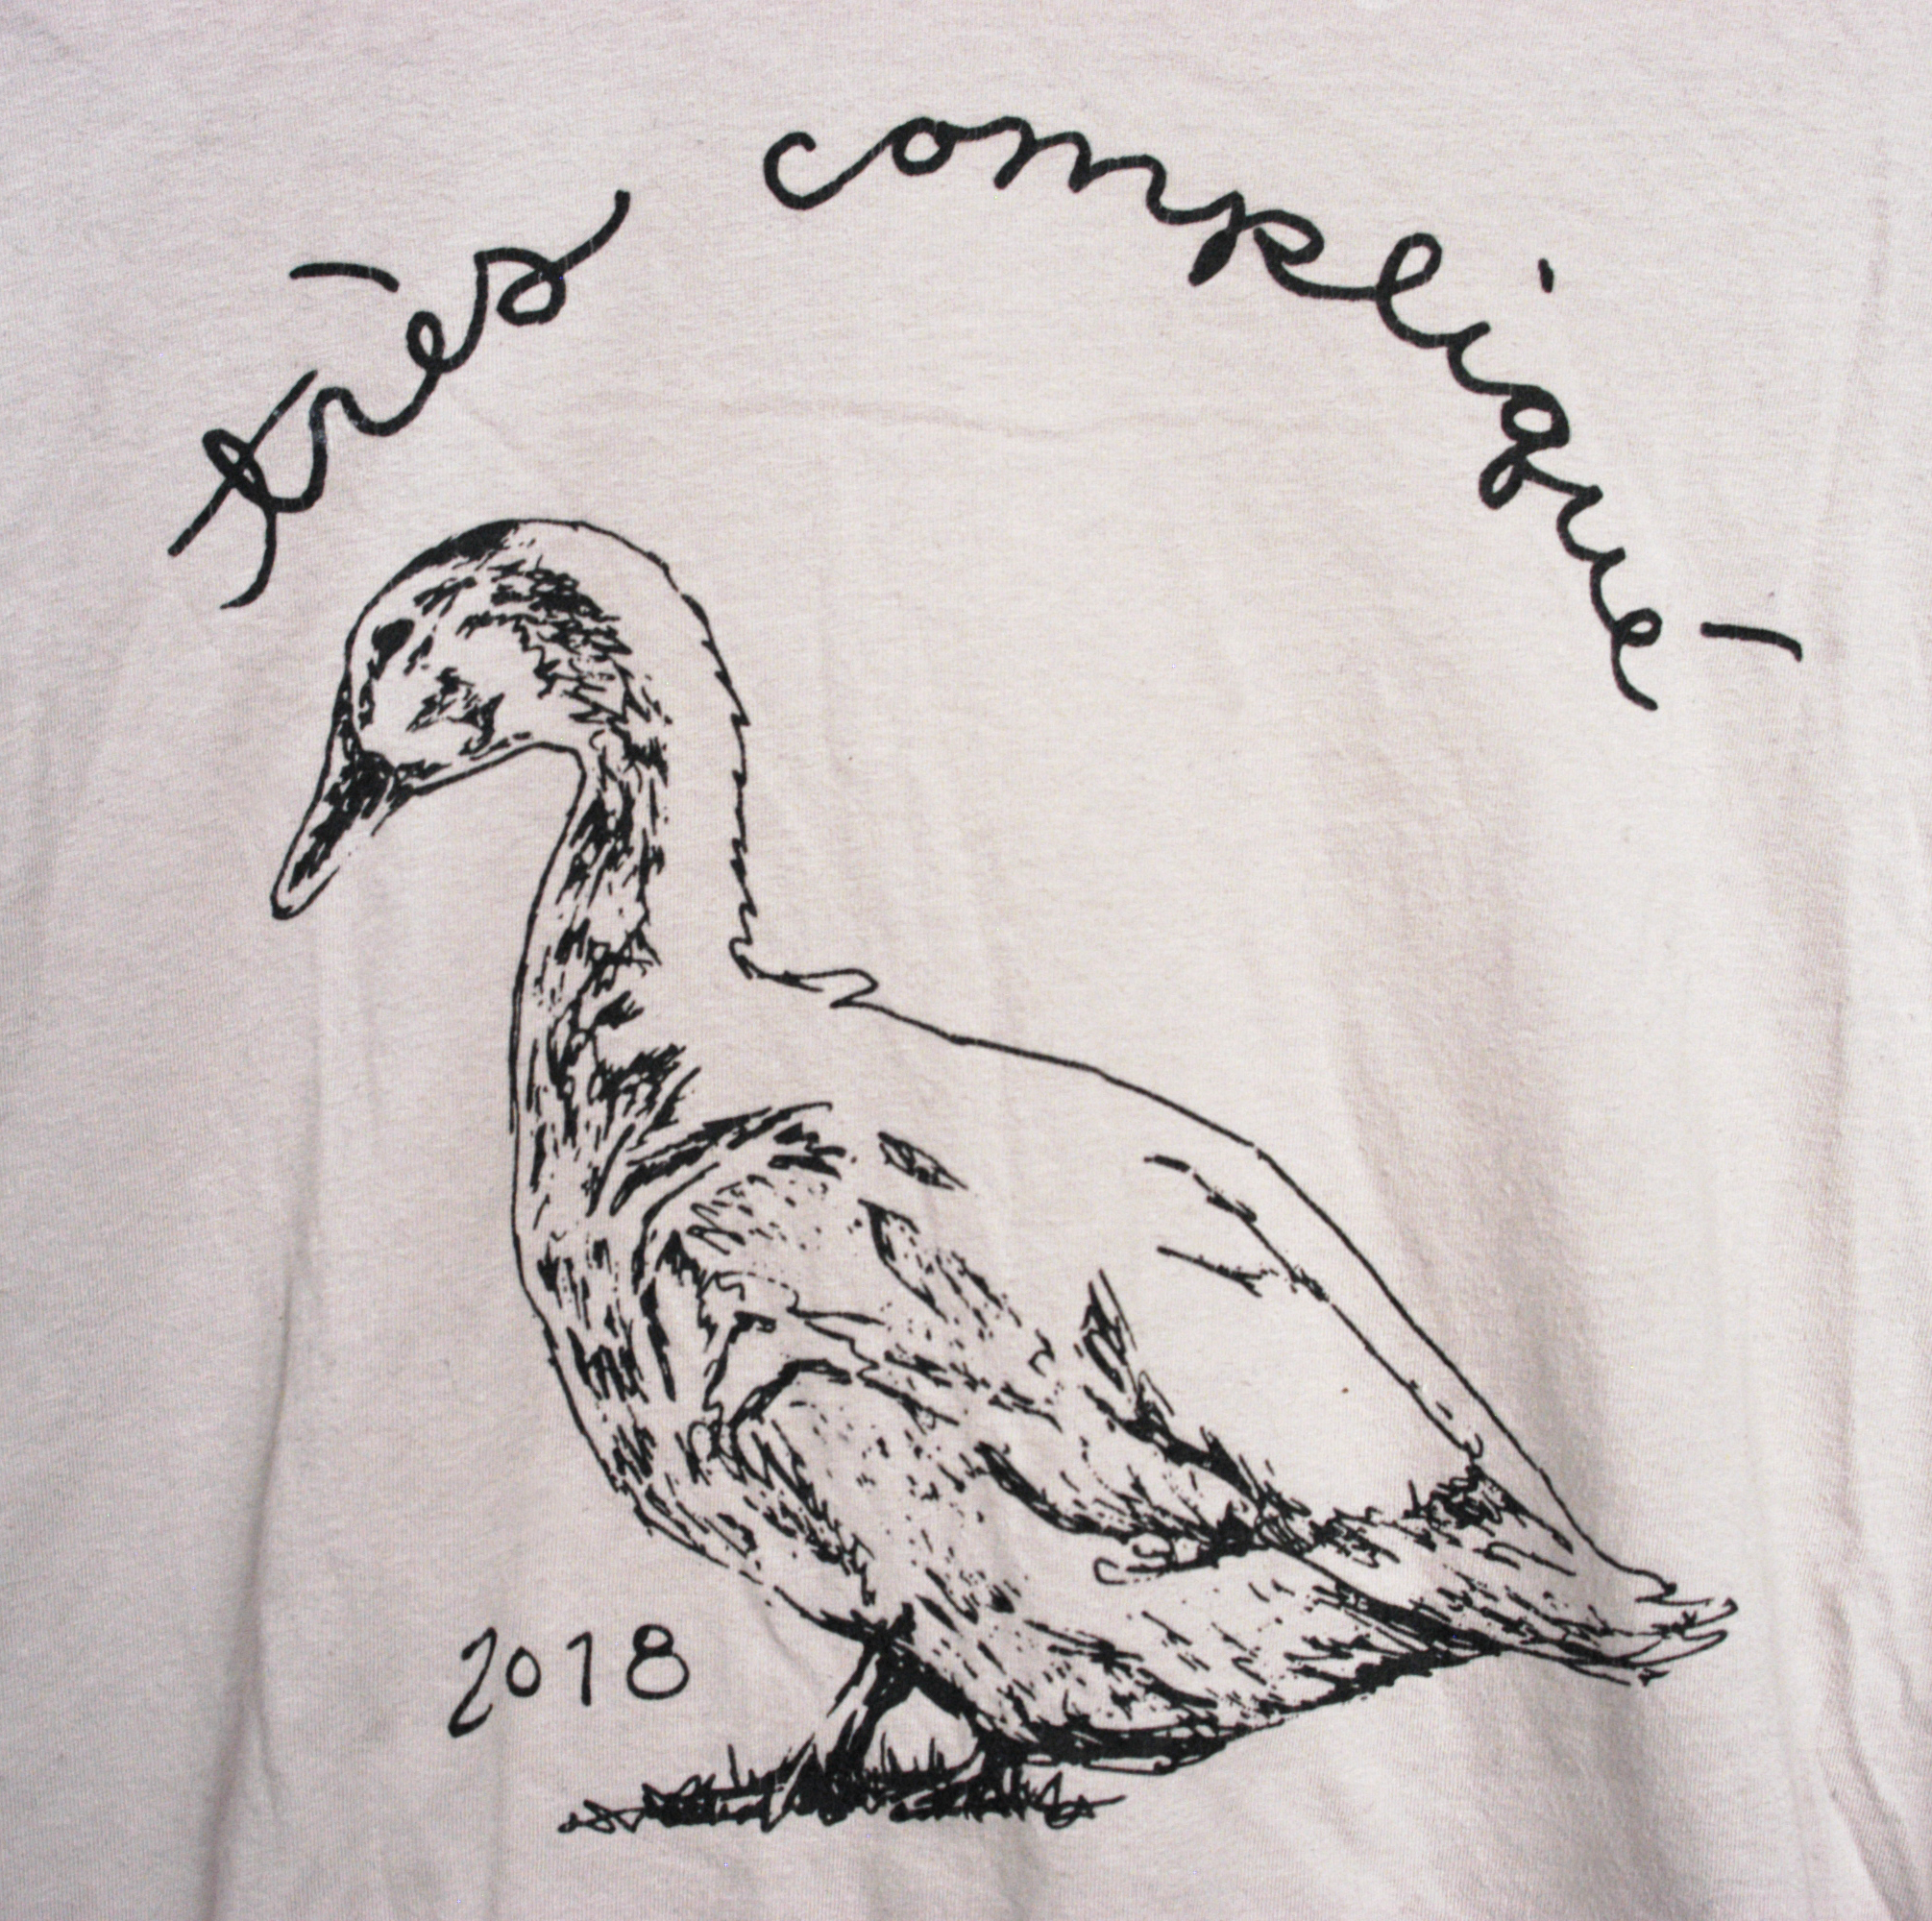 Drawing of a duck screenprinted on a shirt